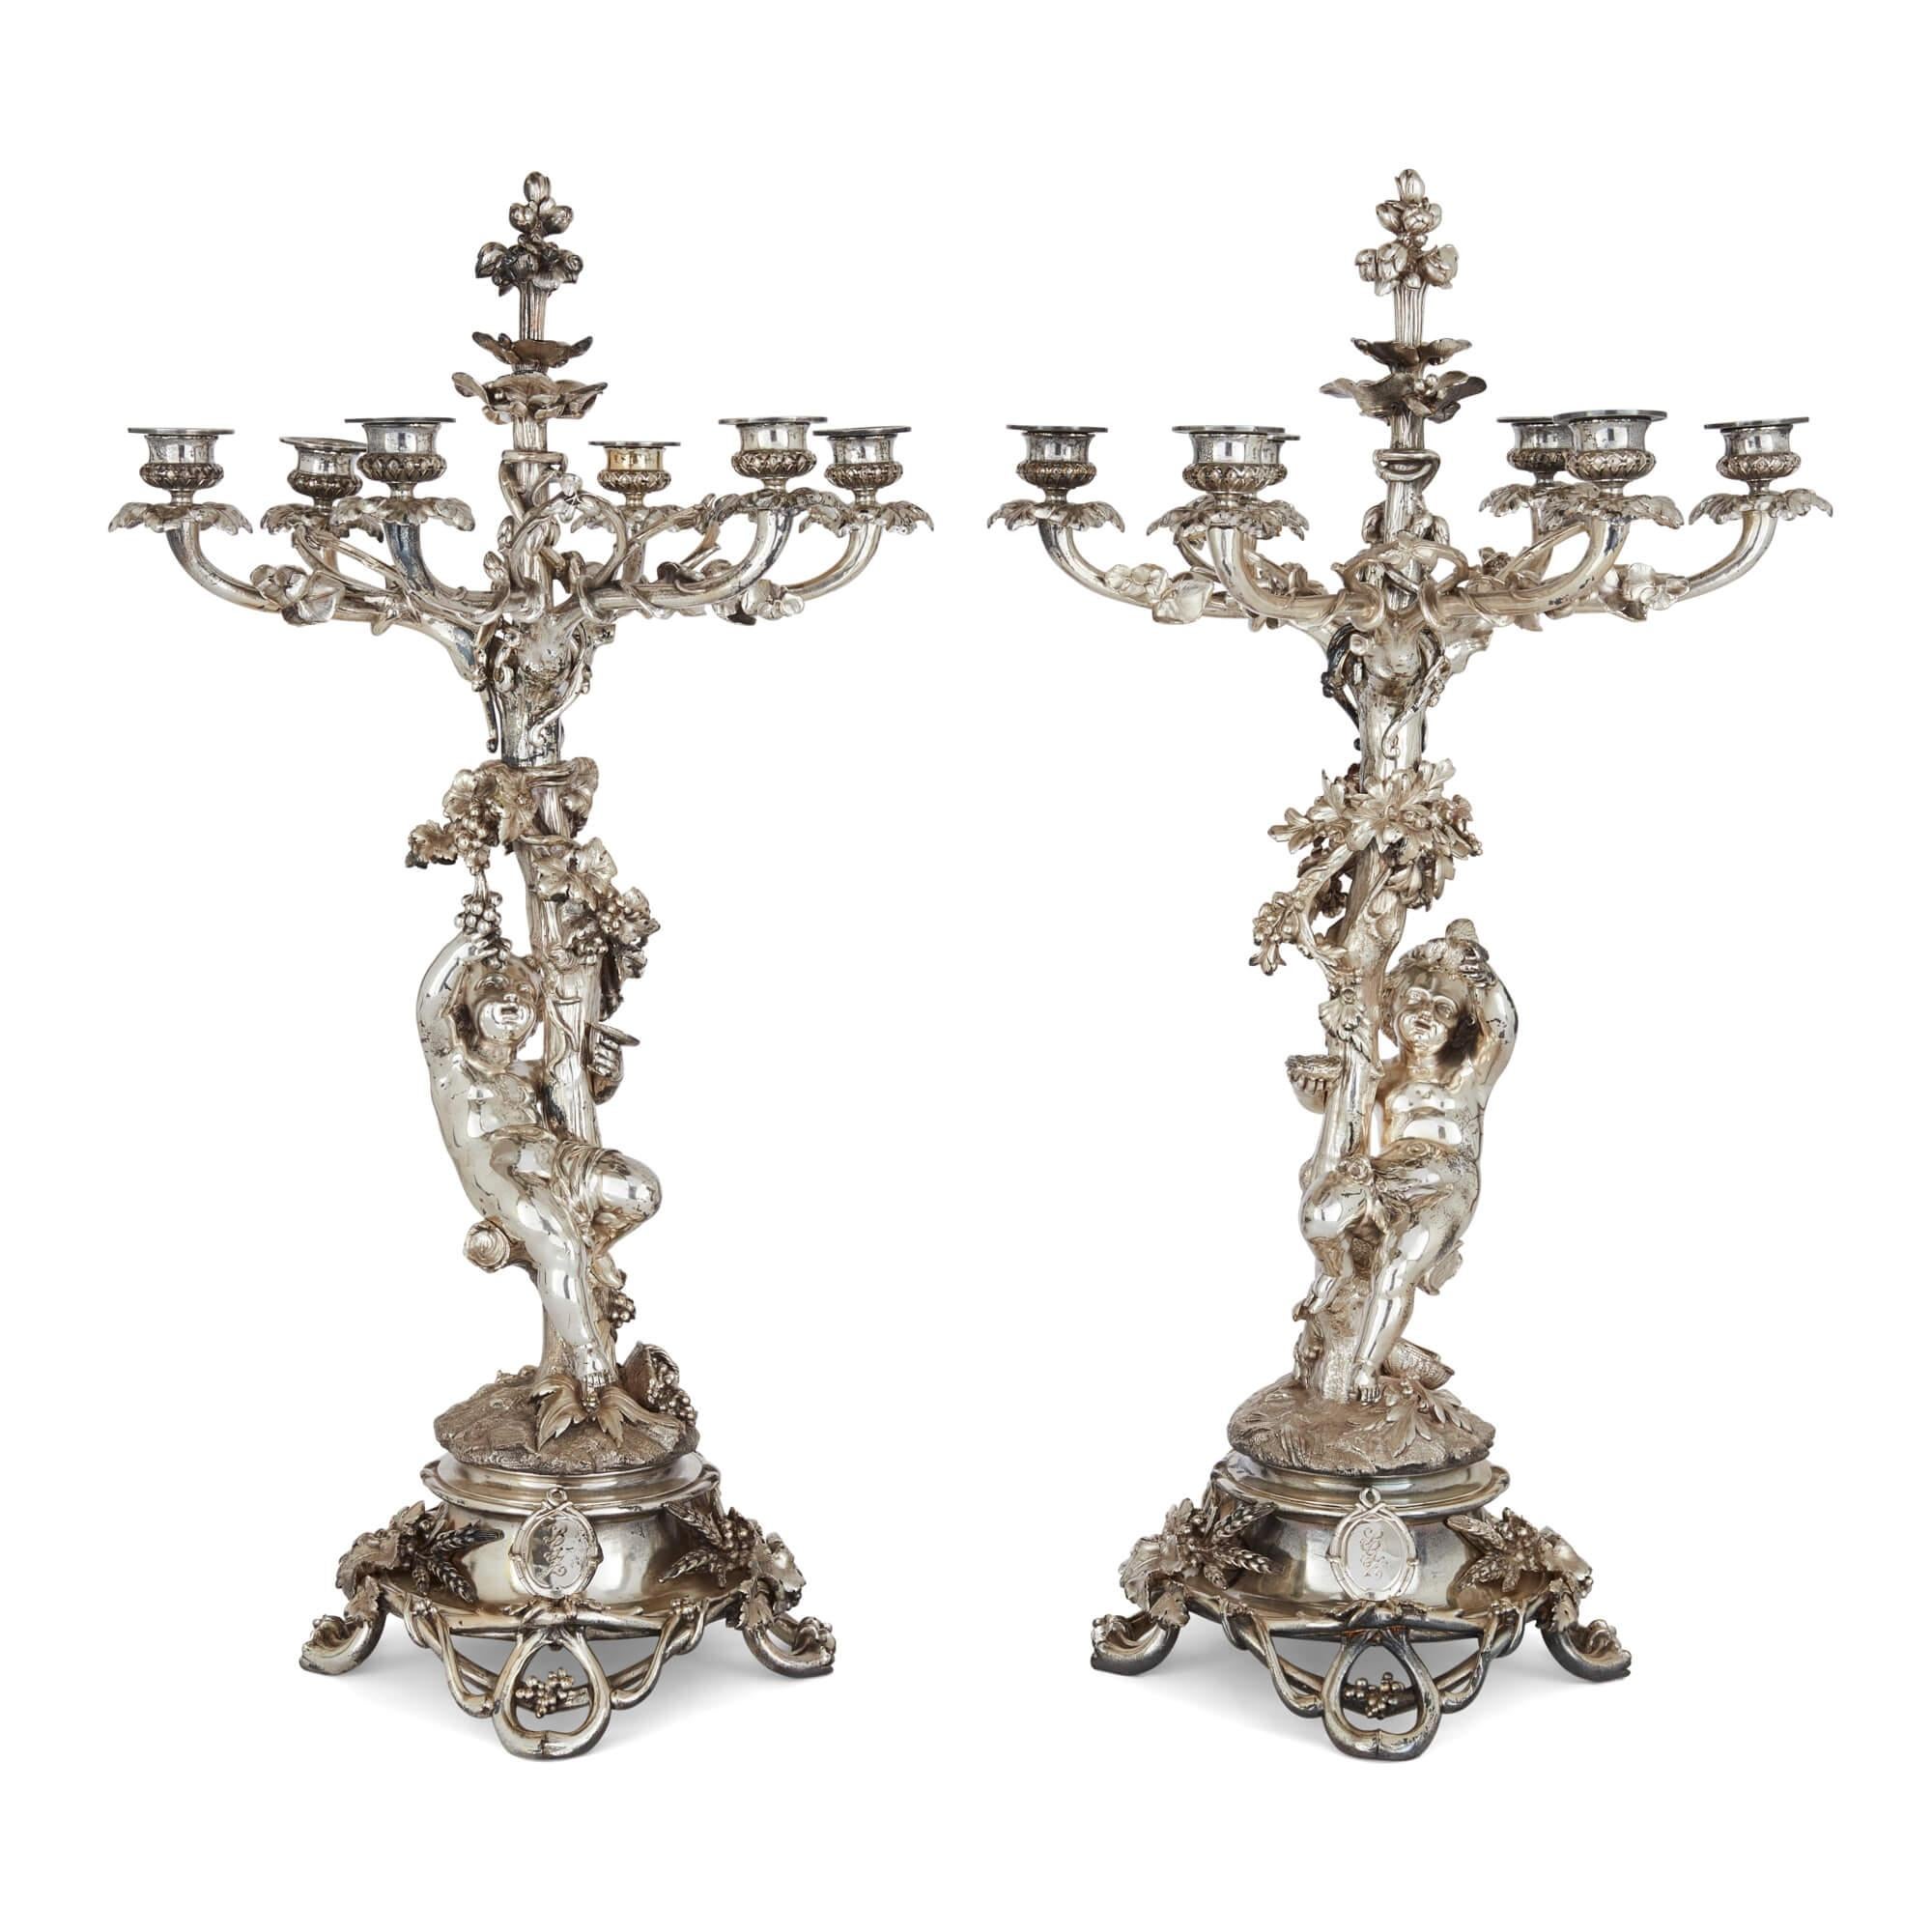 Pair of antique six-light silvered bronze candelabra by Christofle
French, 19th Century
Height 67cm, diameter 37cm

This superb pair of silvered bronze candelabra are crafted in the Rococo style. The circular bases stand on four openwork grapevine